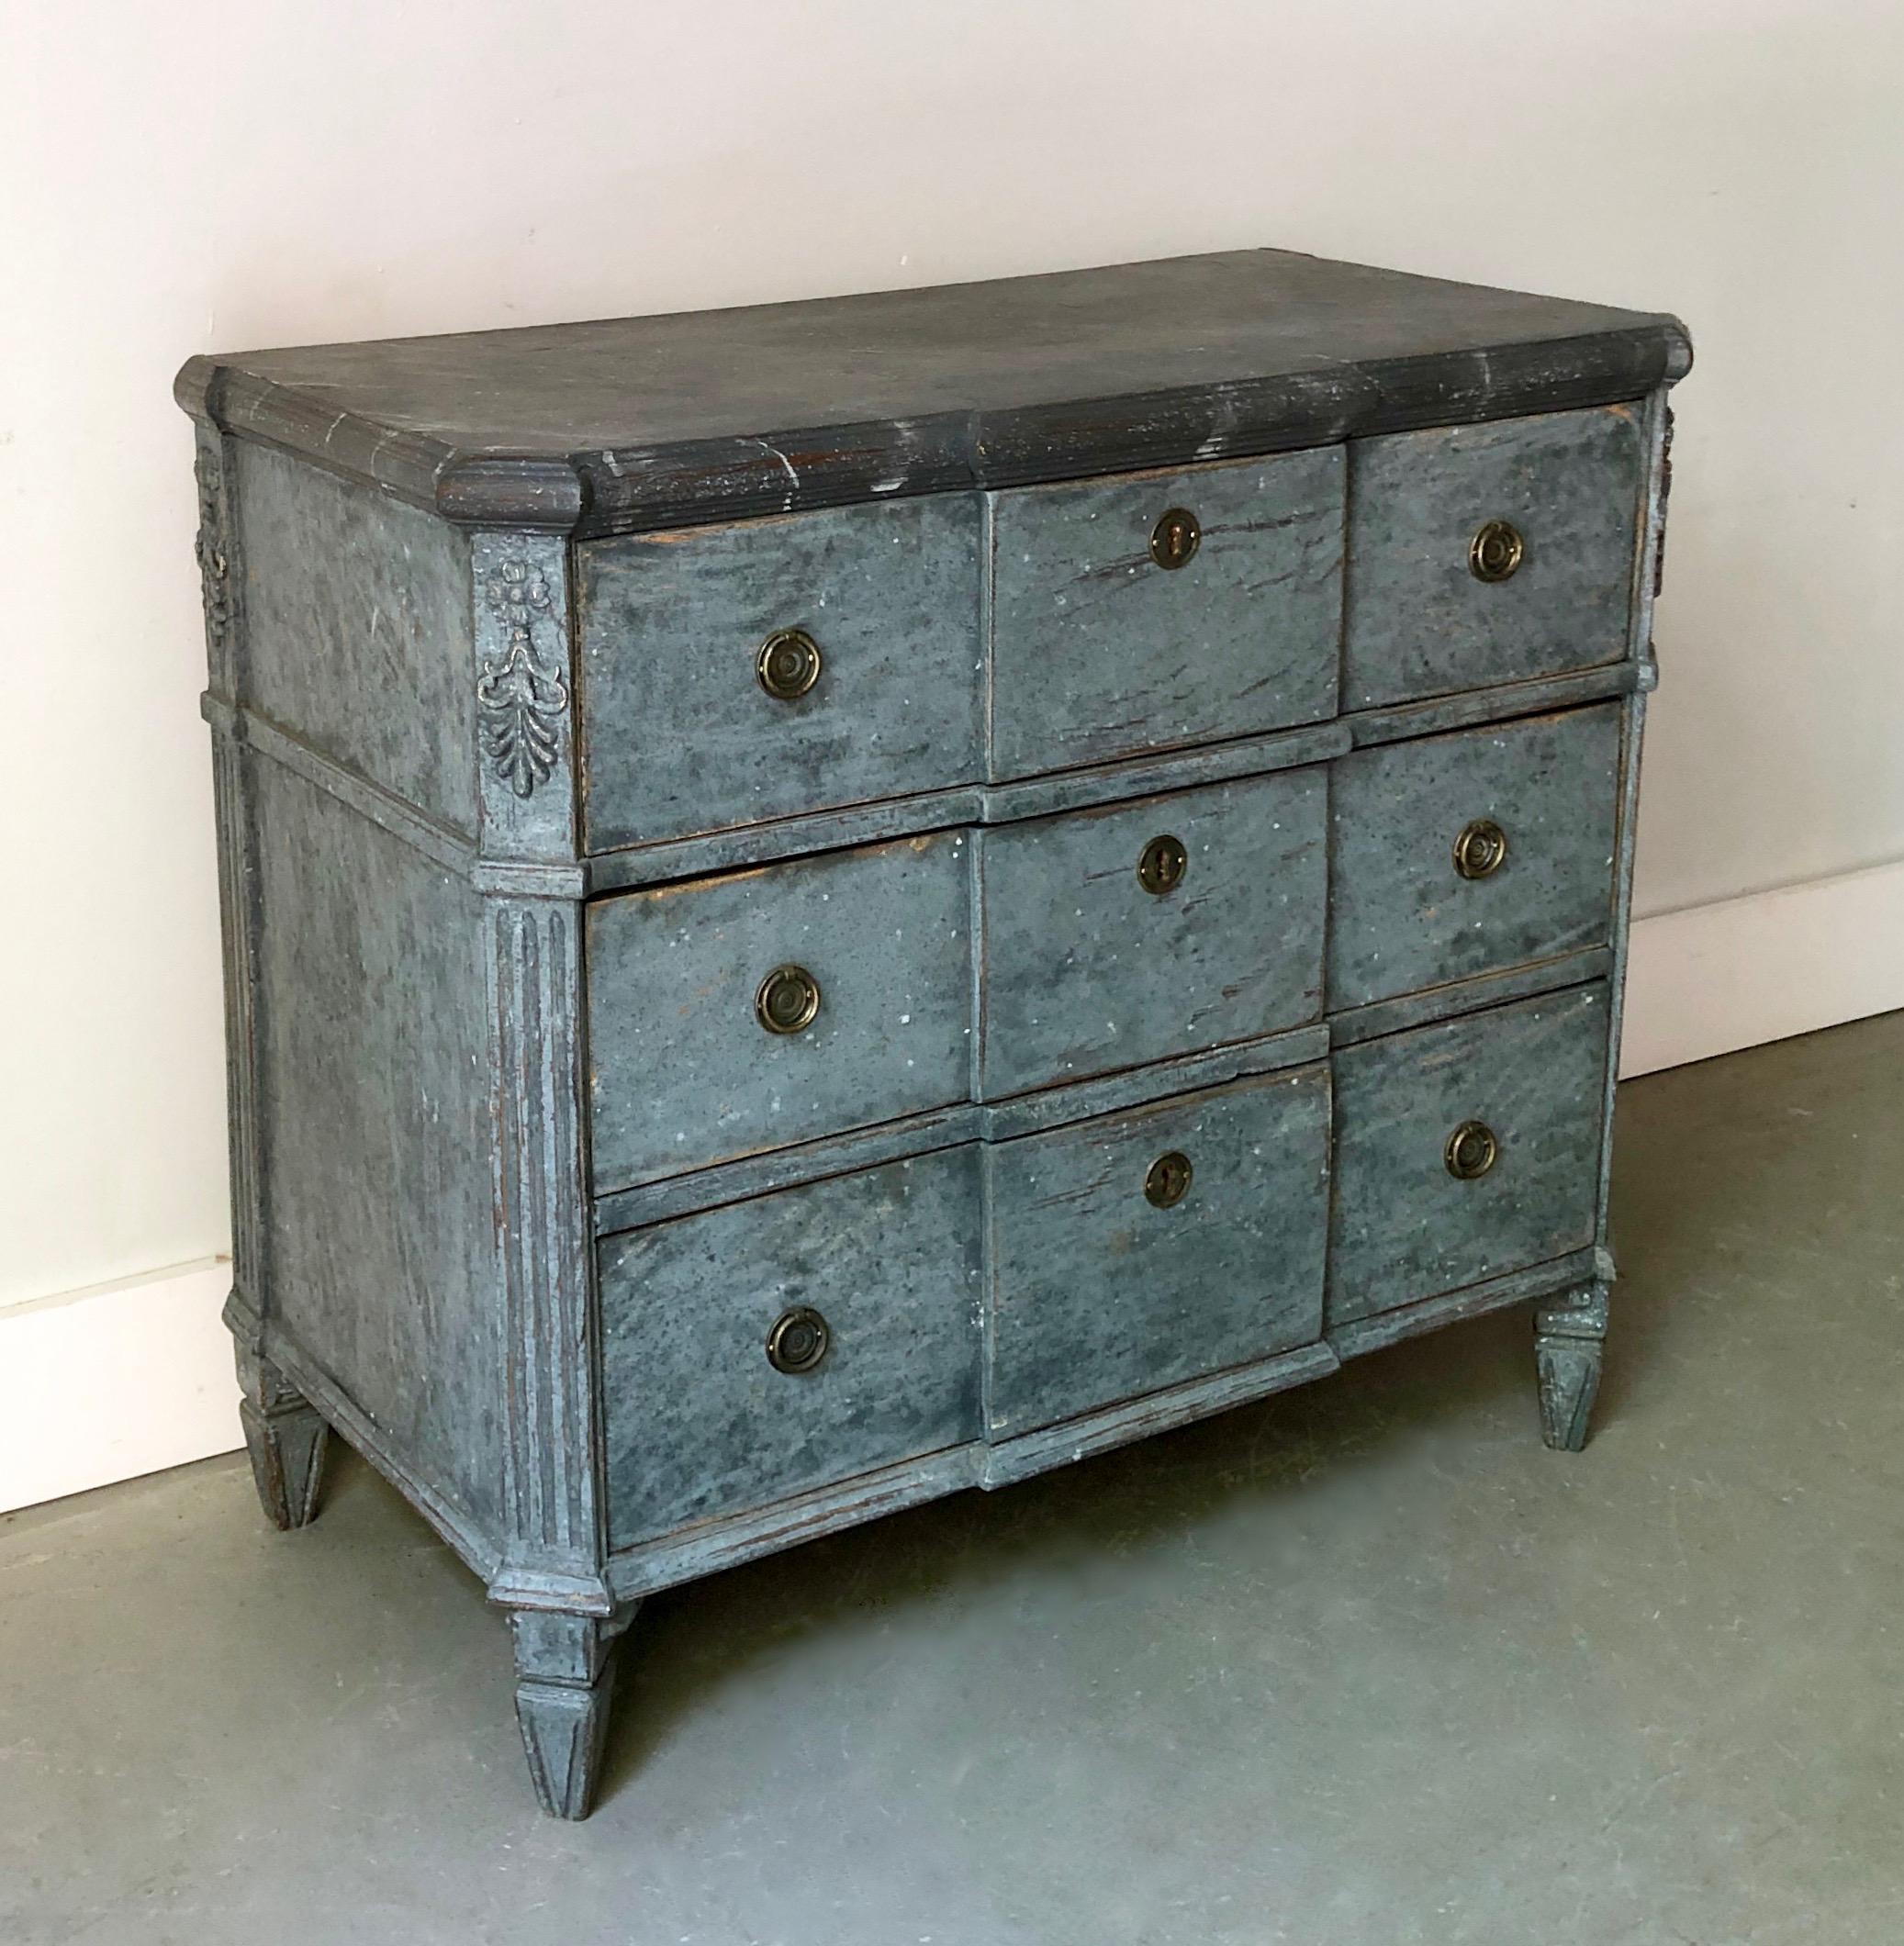 19th century Swedish chest of three drawers with raised panel drawer fronts, canted corners and foliate carvings, shaped marbleized wooden top in re-finished blue.
Surprising pieces and objects, authentic, decorative and rare items. Discover them